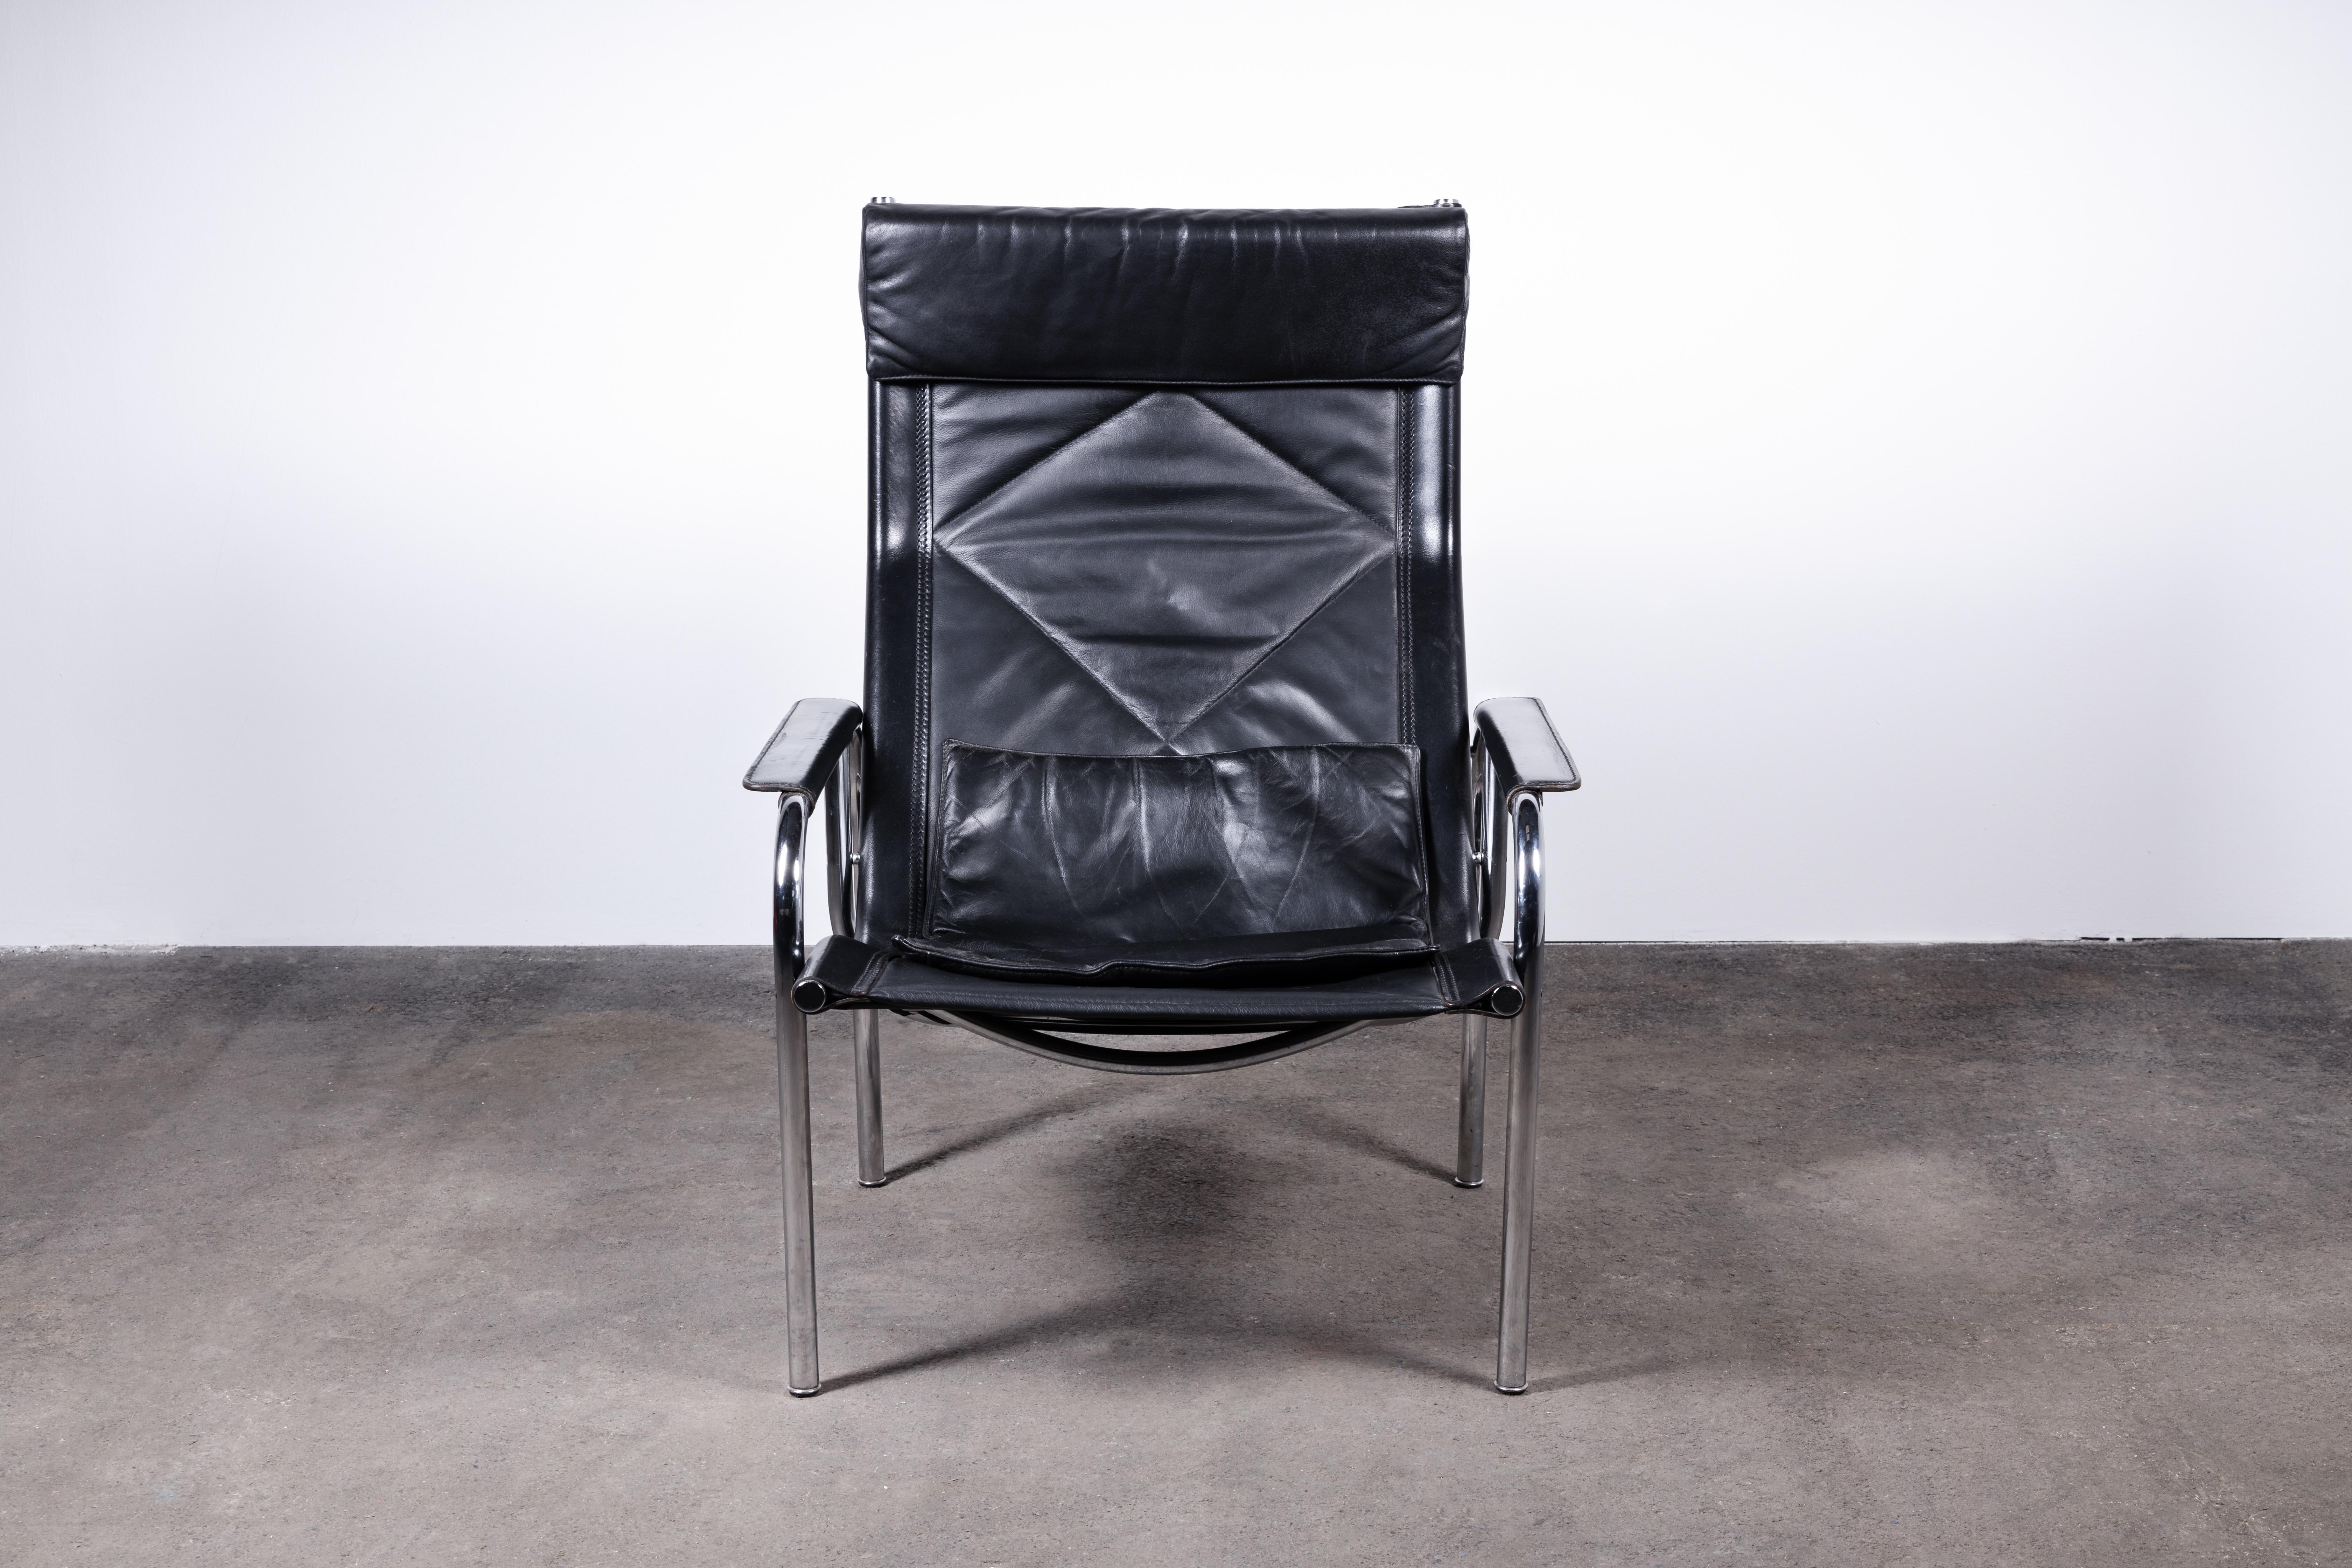 Mid-Century Modern pair of high-back reclining chairs in black leather and chromed tubed steel. Made in Switzerland by Strässle International and designed by Hans Eichenberger. Both lounge chairs feature leather seat cushions as well as vertically